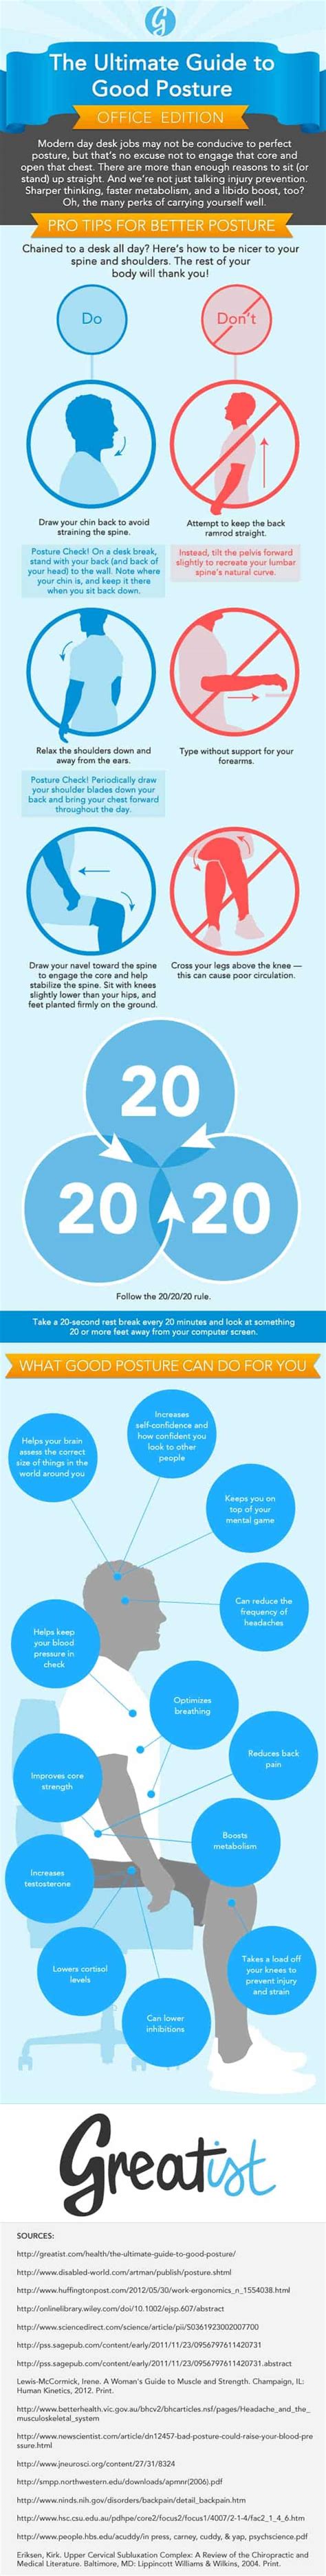 Keeping Good Posture At Work Infographic Daily Infographic